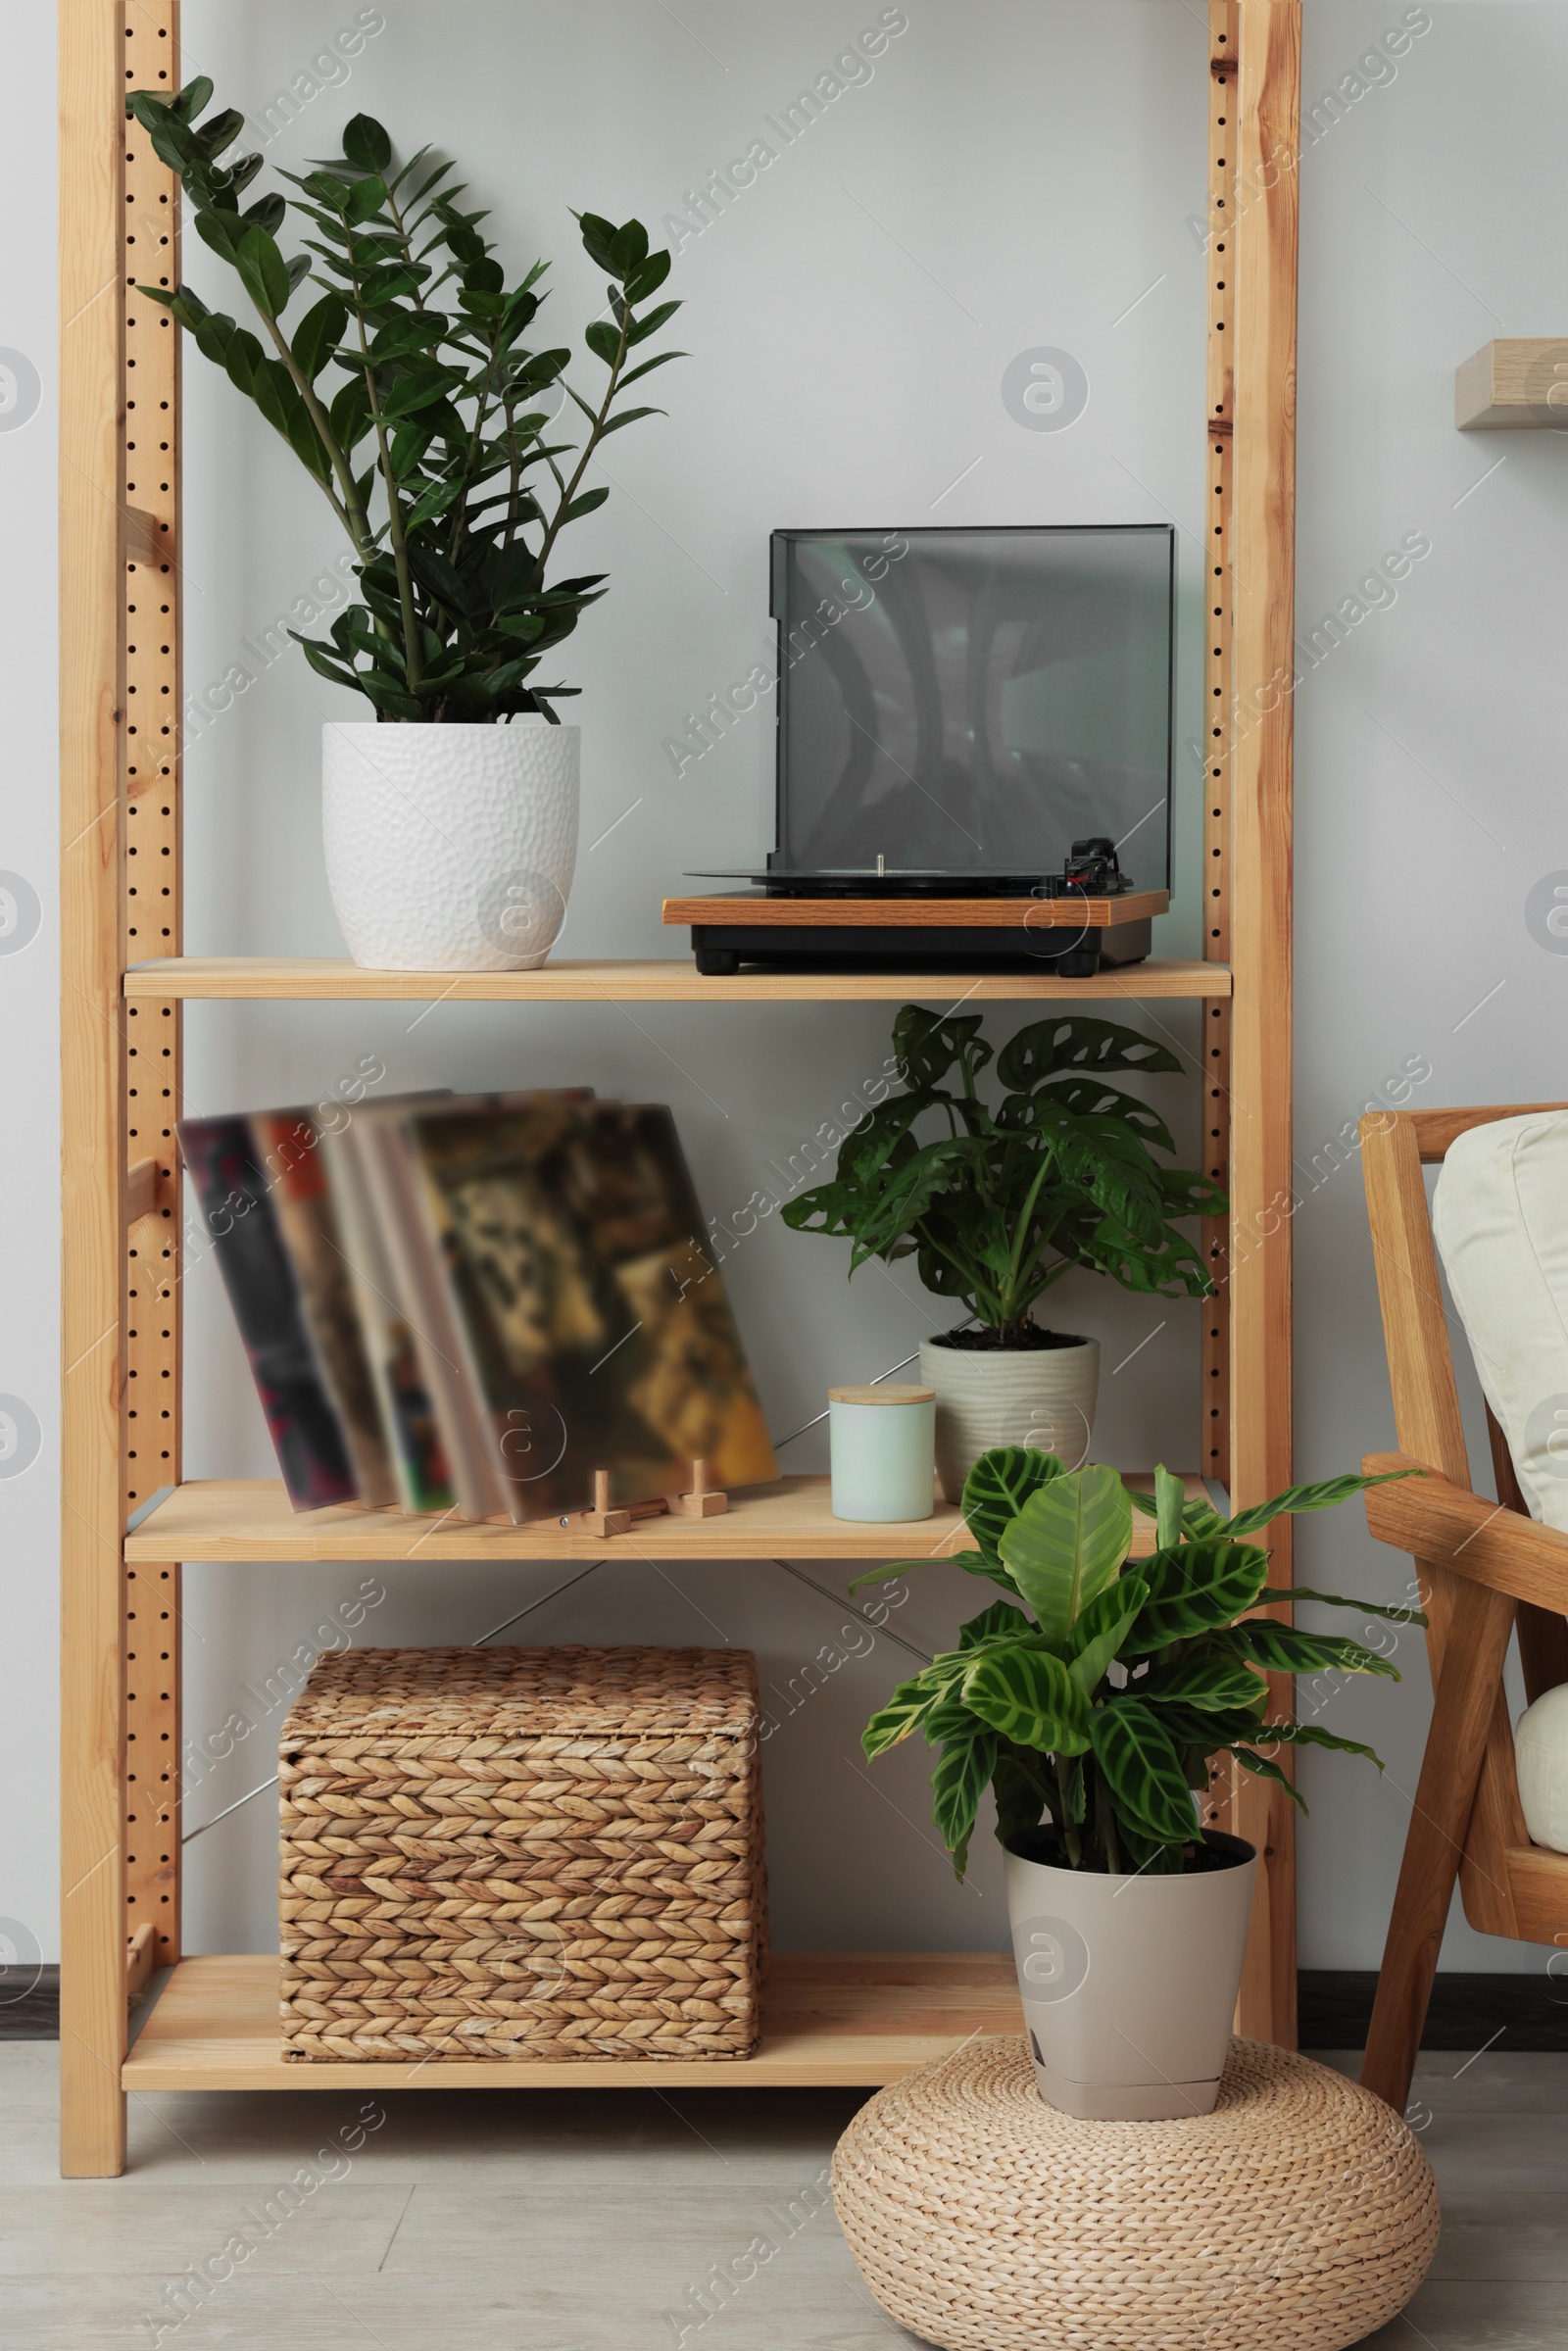 Photo of Wooden shelving unit with turntable, vinyl records and beautiful houseplants in room